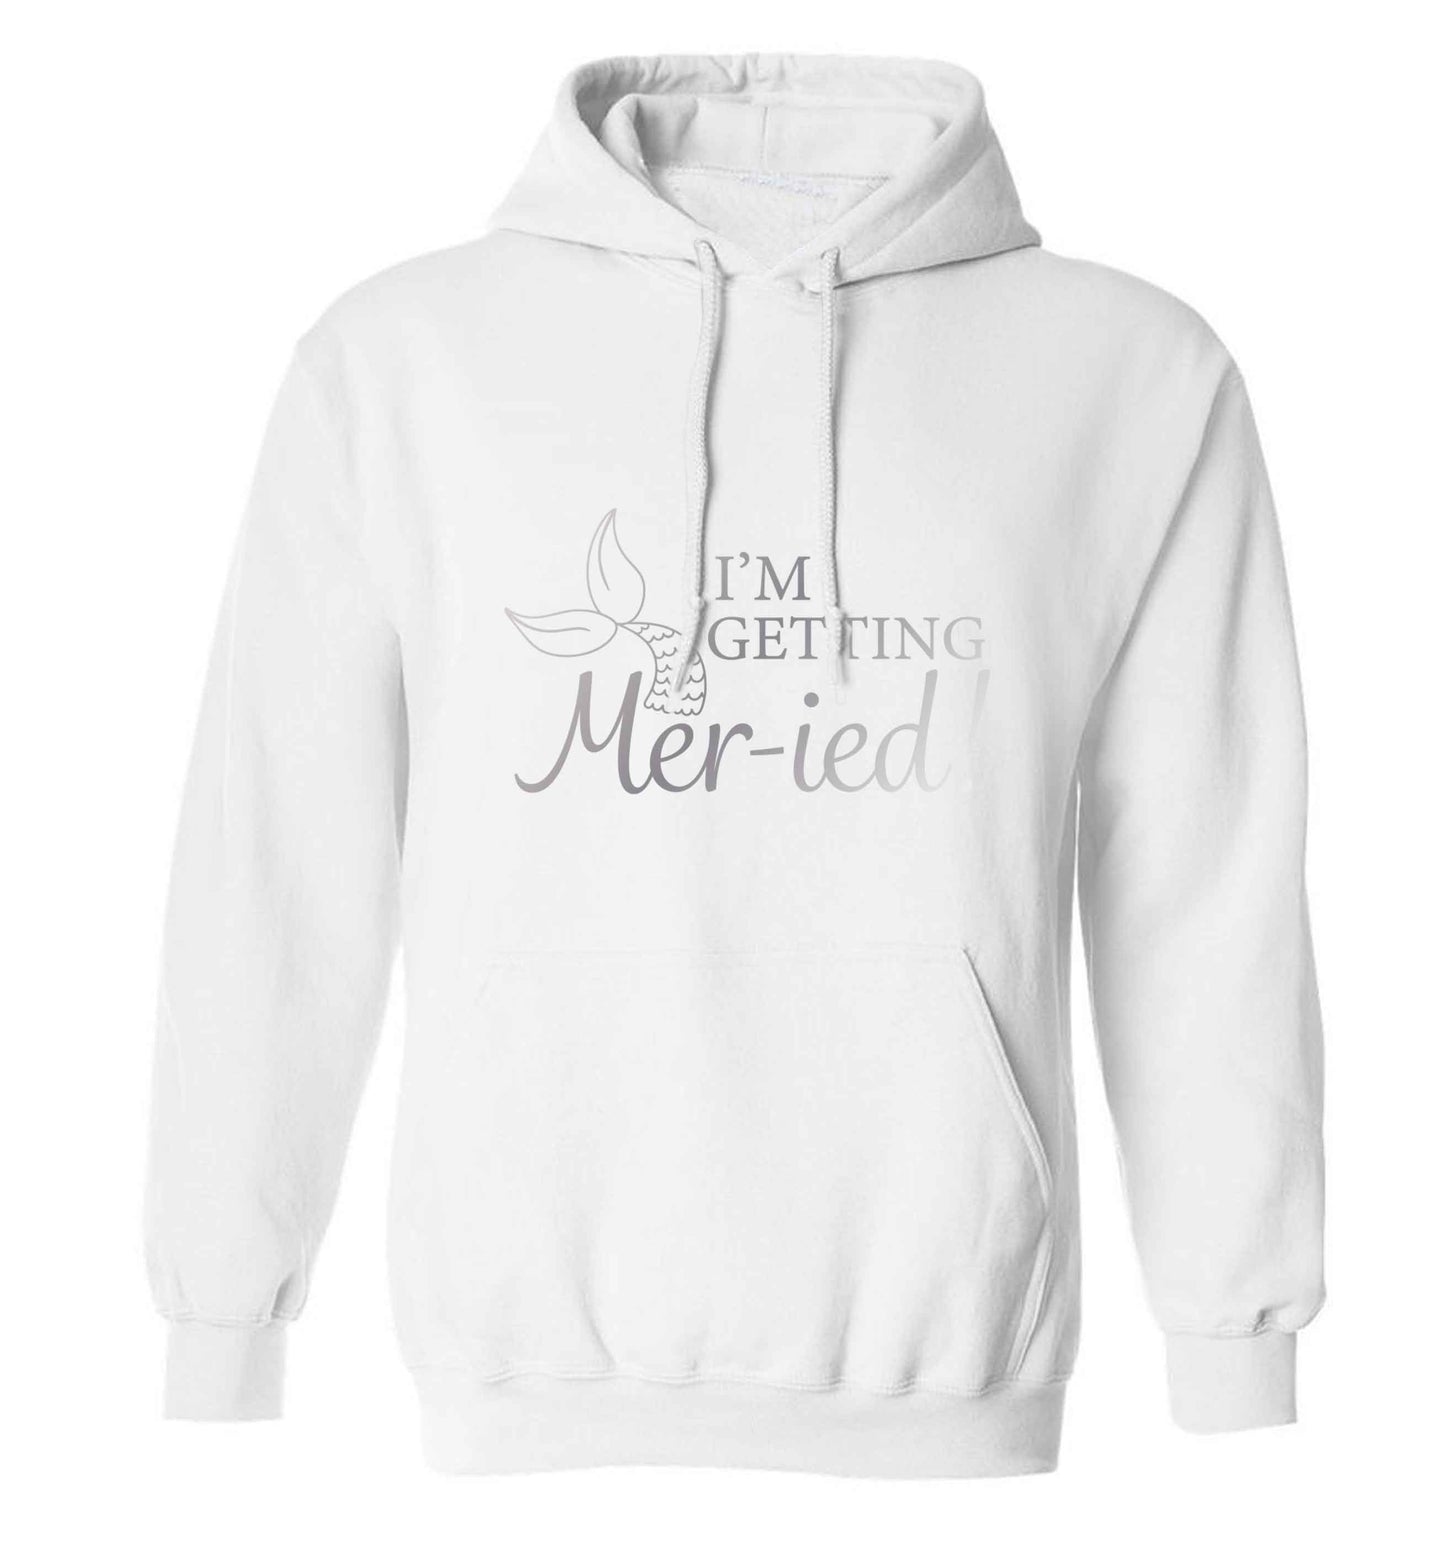 Personalised wedding thank you's Mr and Mrs wedding and date! Ideal wedding favours! adults unisex white hoodie 2XL